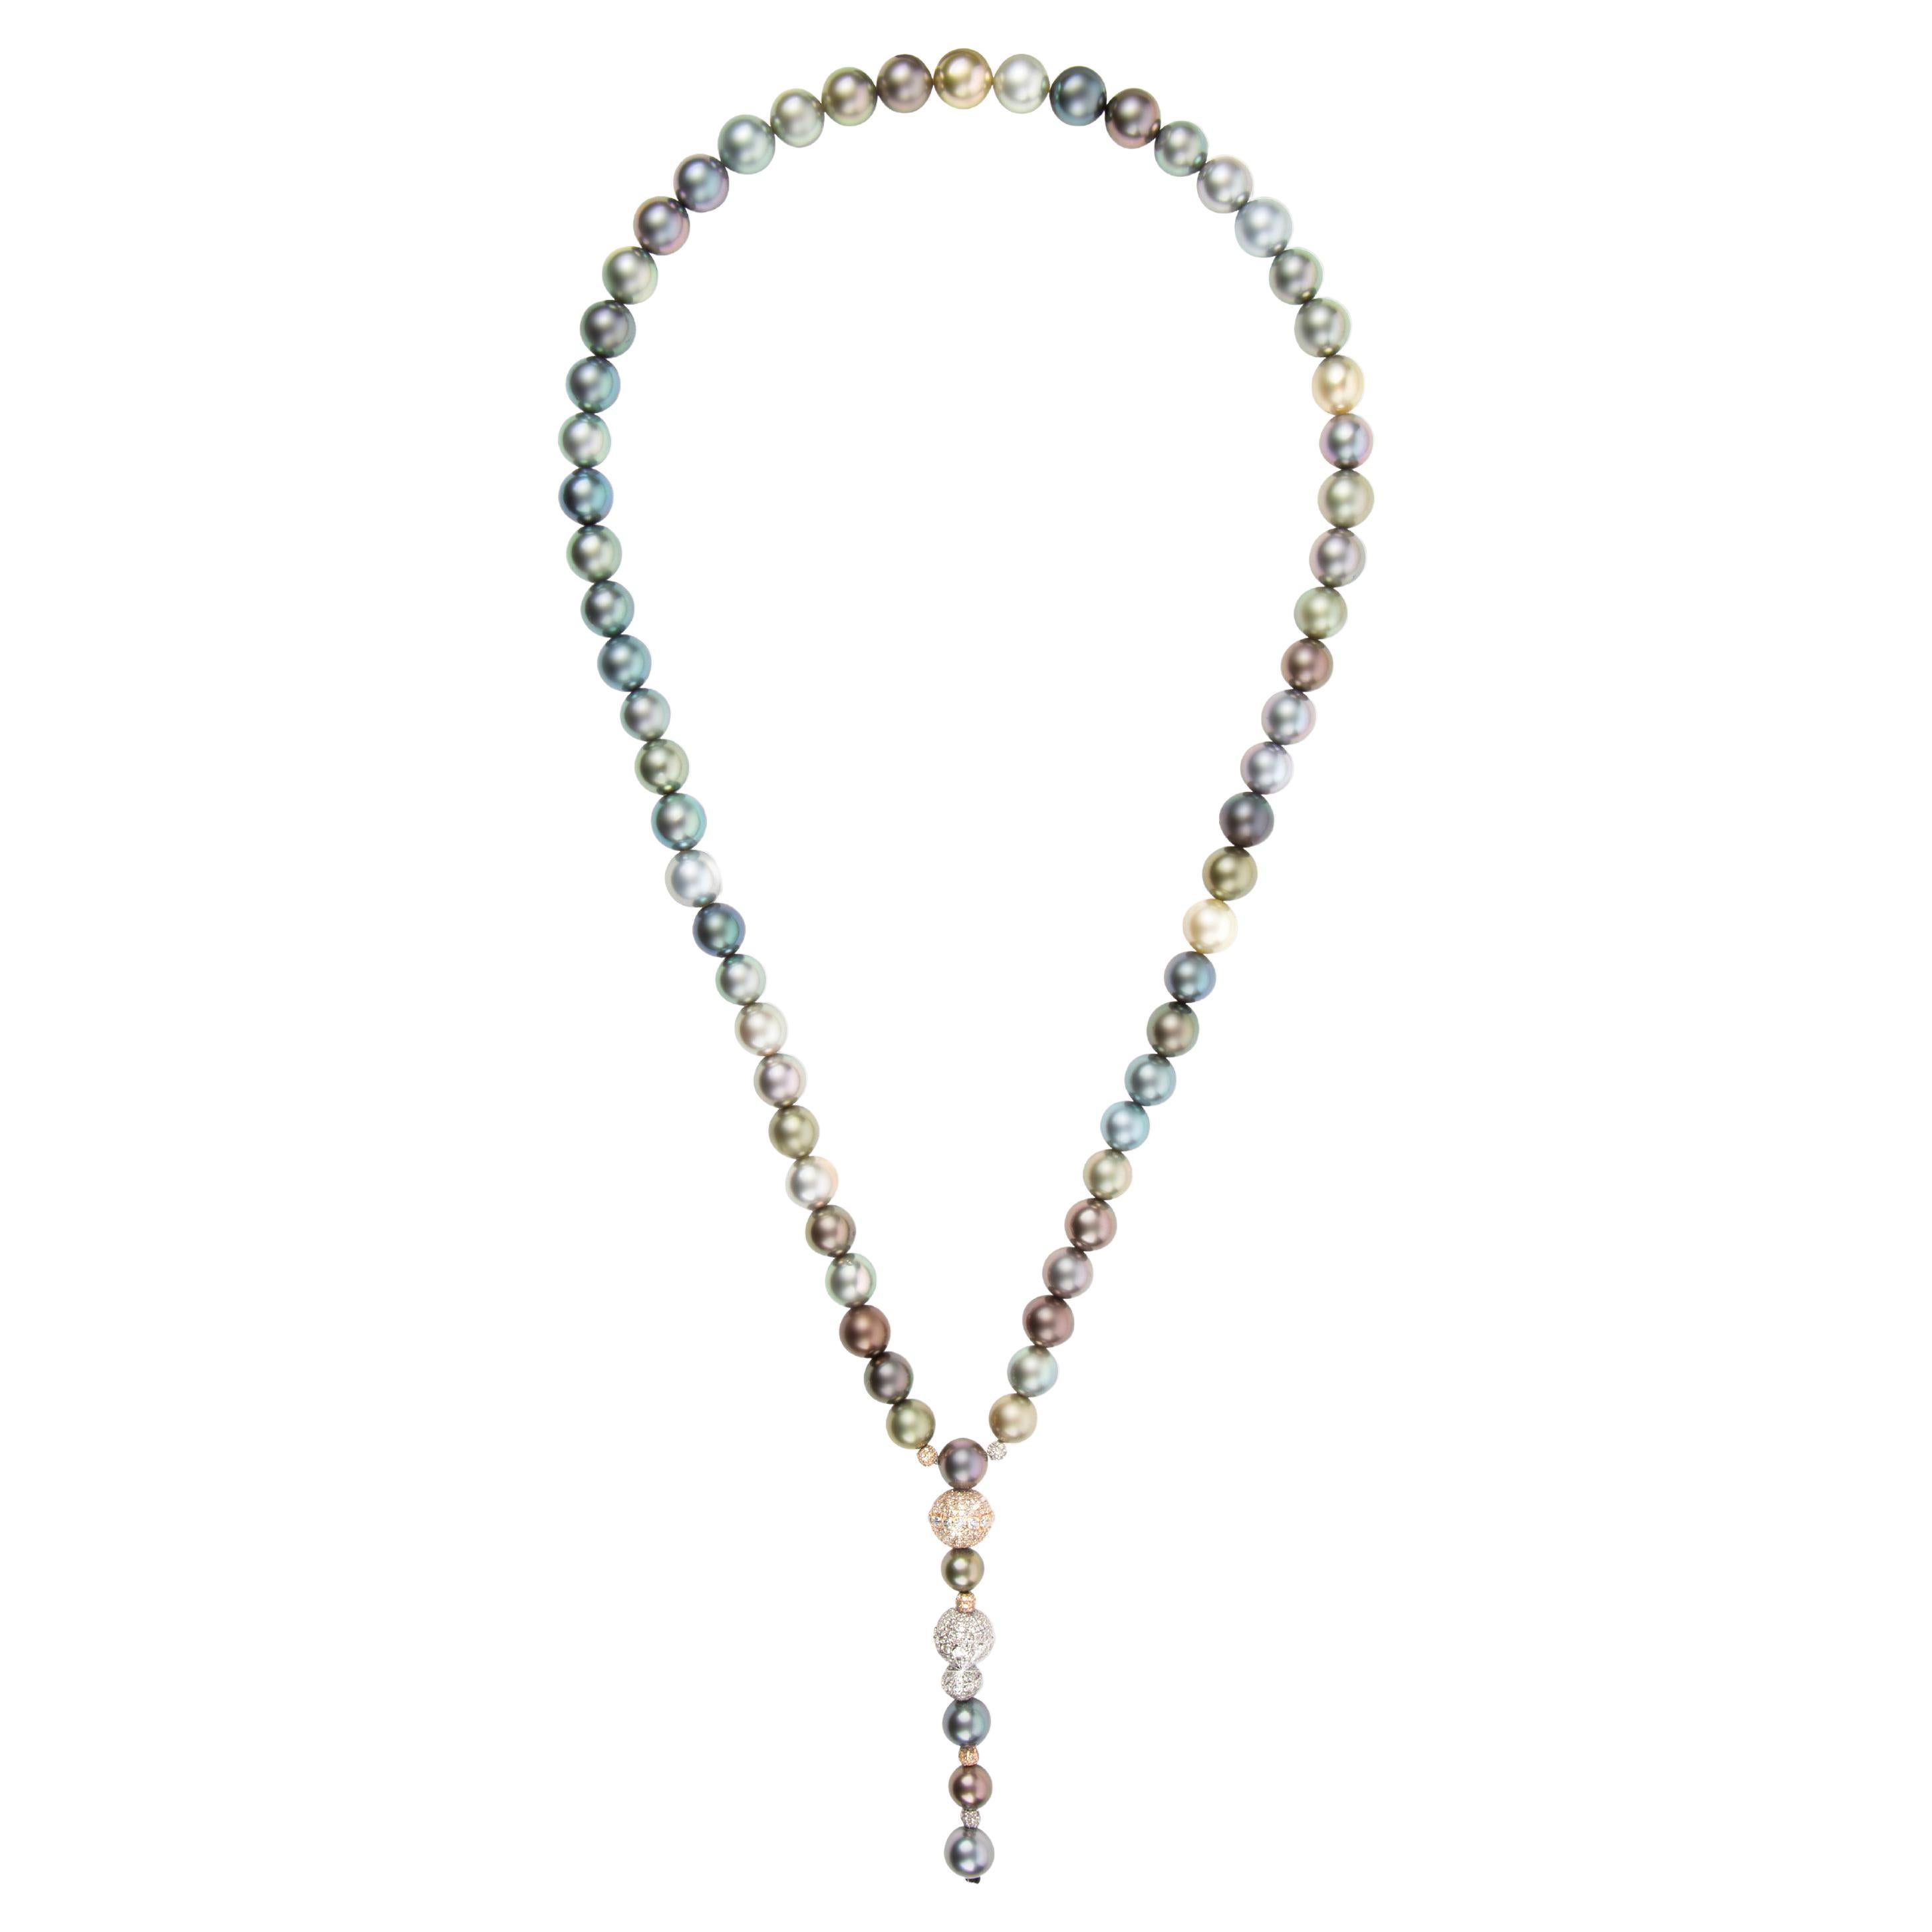 Tahiti Pearl Necklace with 18k White and Yellow Gold, Diamond-Encrusted Orbs